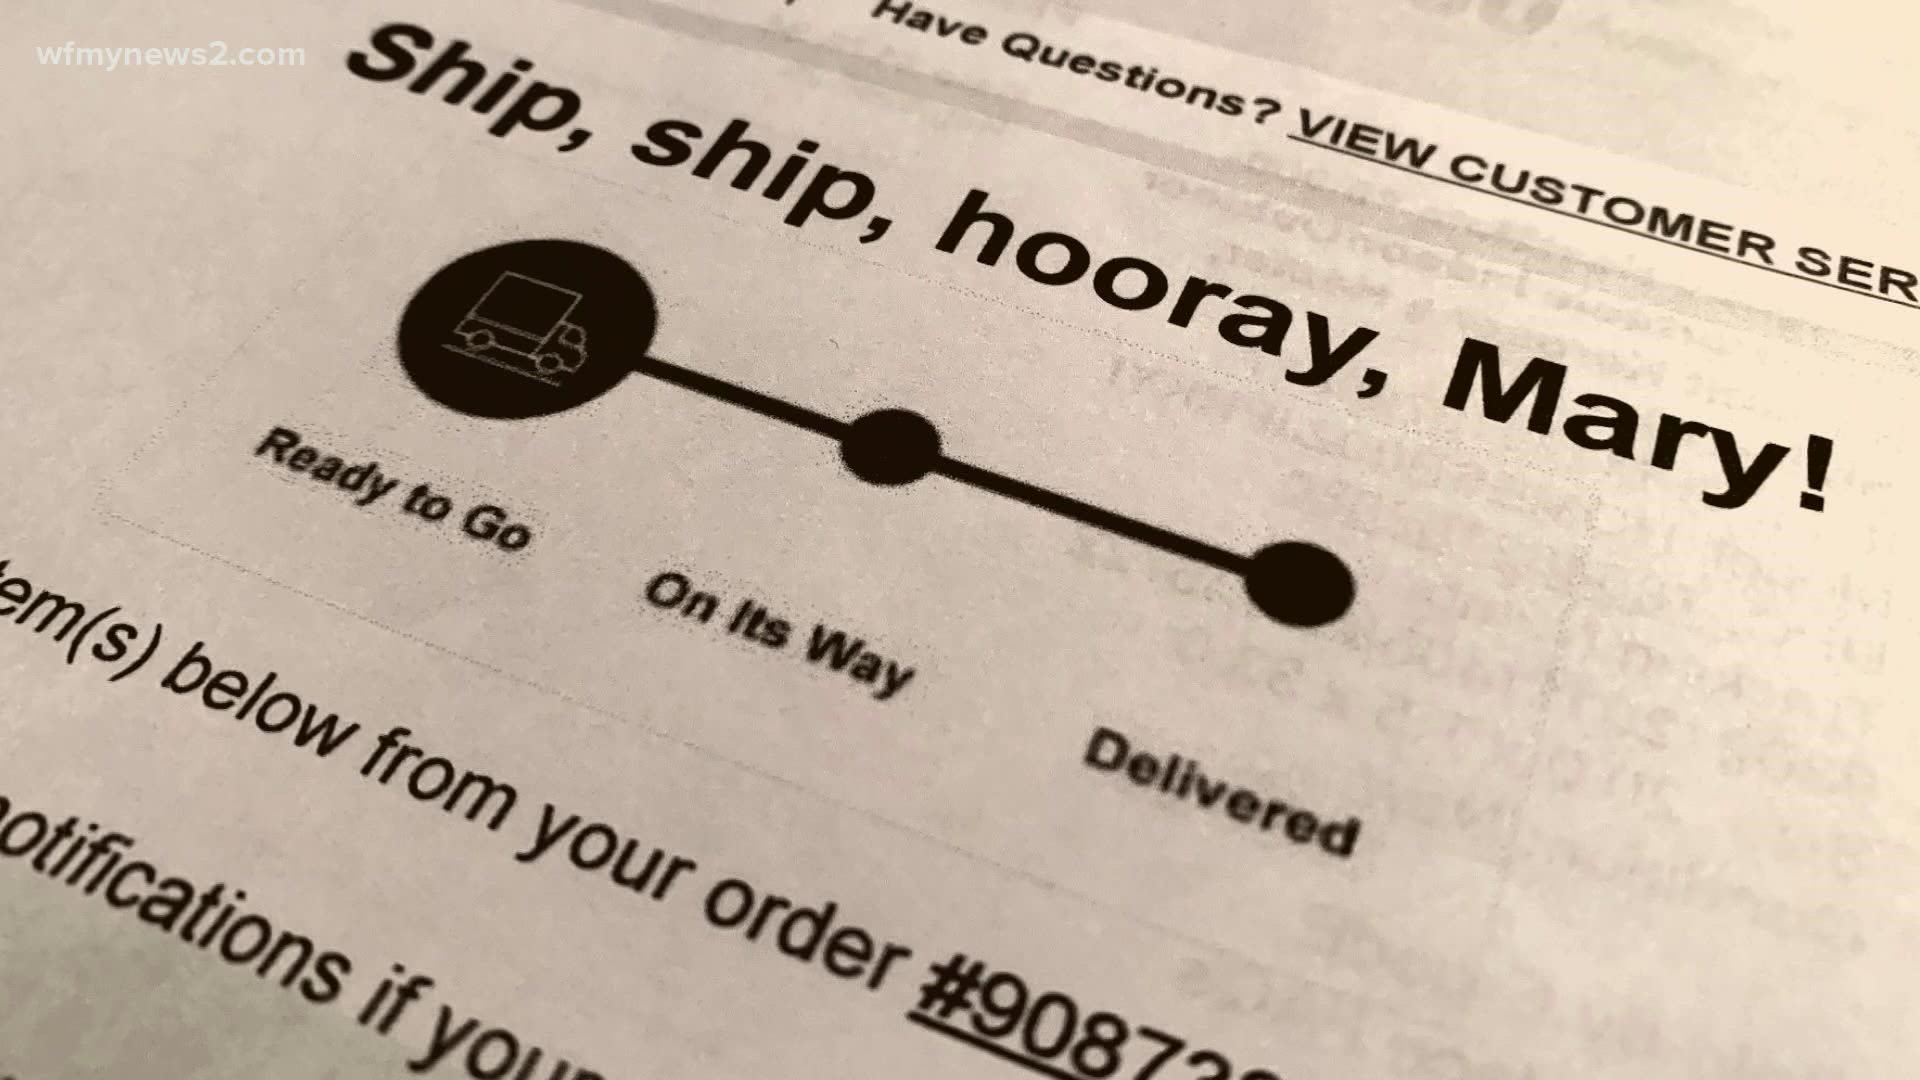 She had it delivered to her house, but it didn't arrive. When the company wouldn't give her a refund, 2 Wants to Know stepped in.